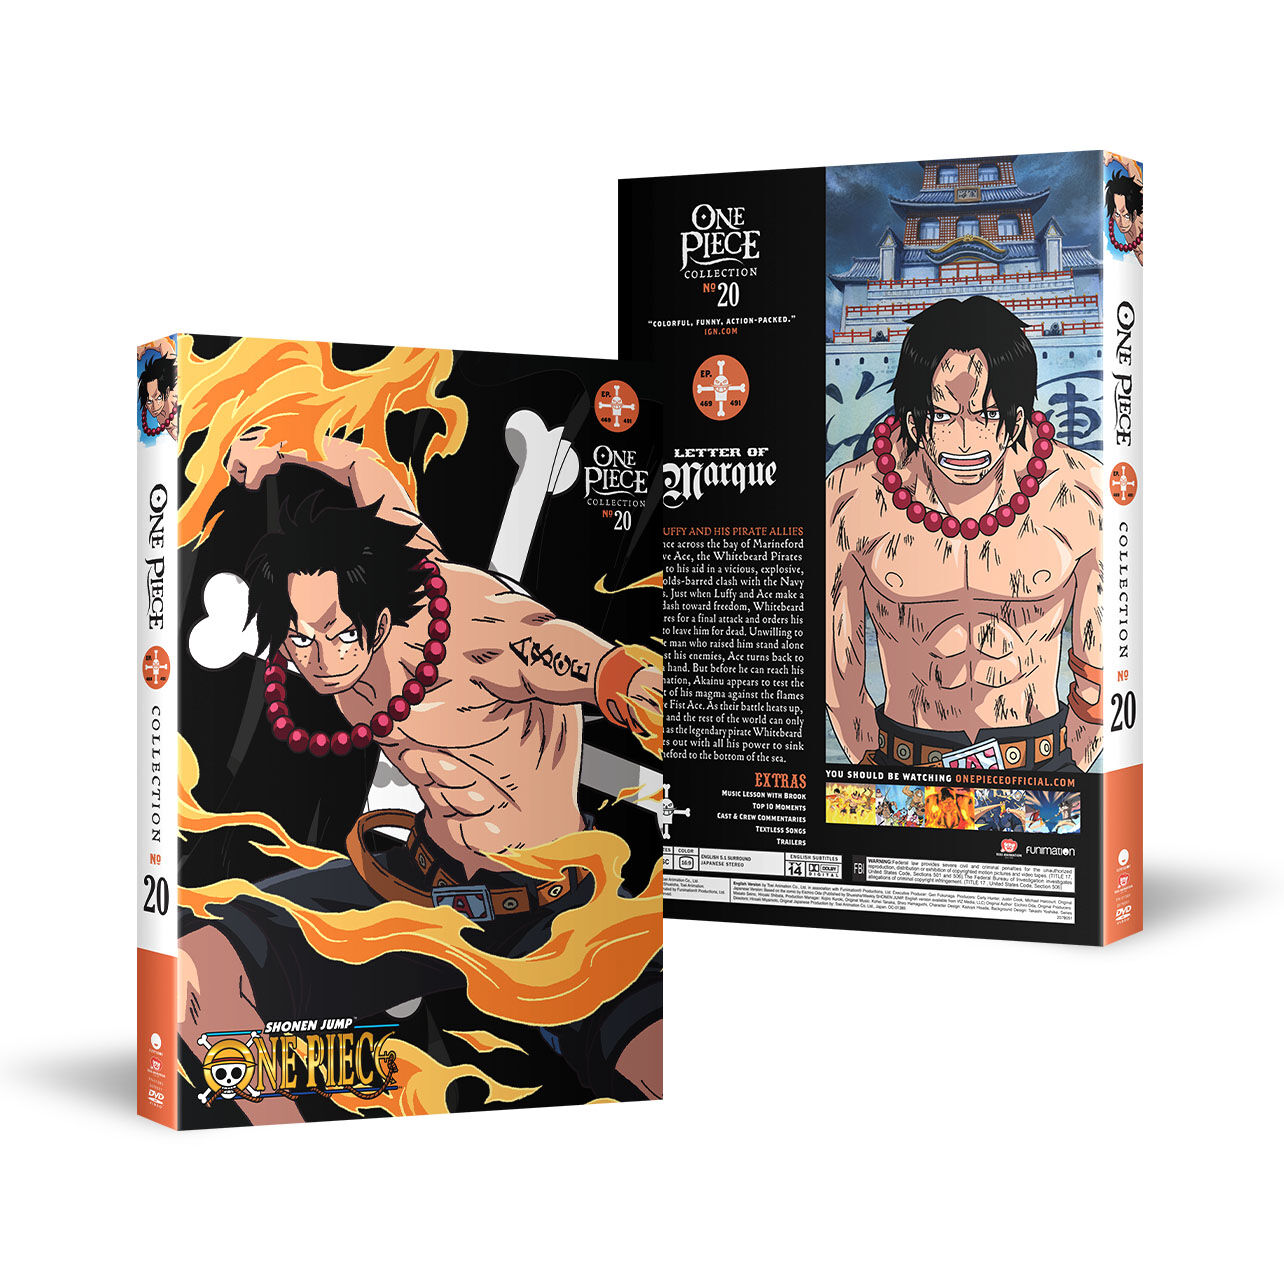 One Piece - Collection 20 - DVD | Crunchyroll Store